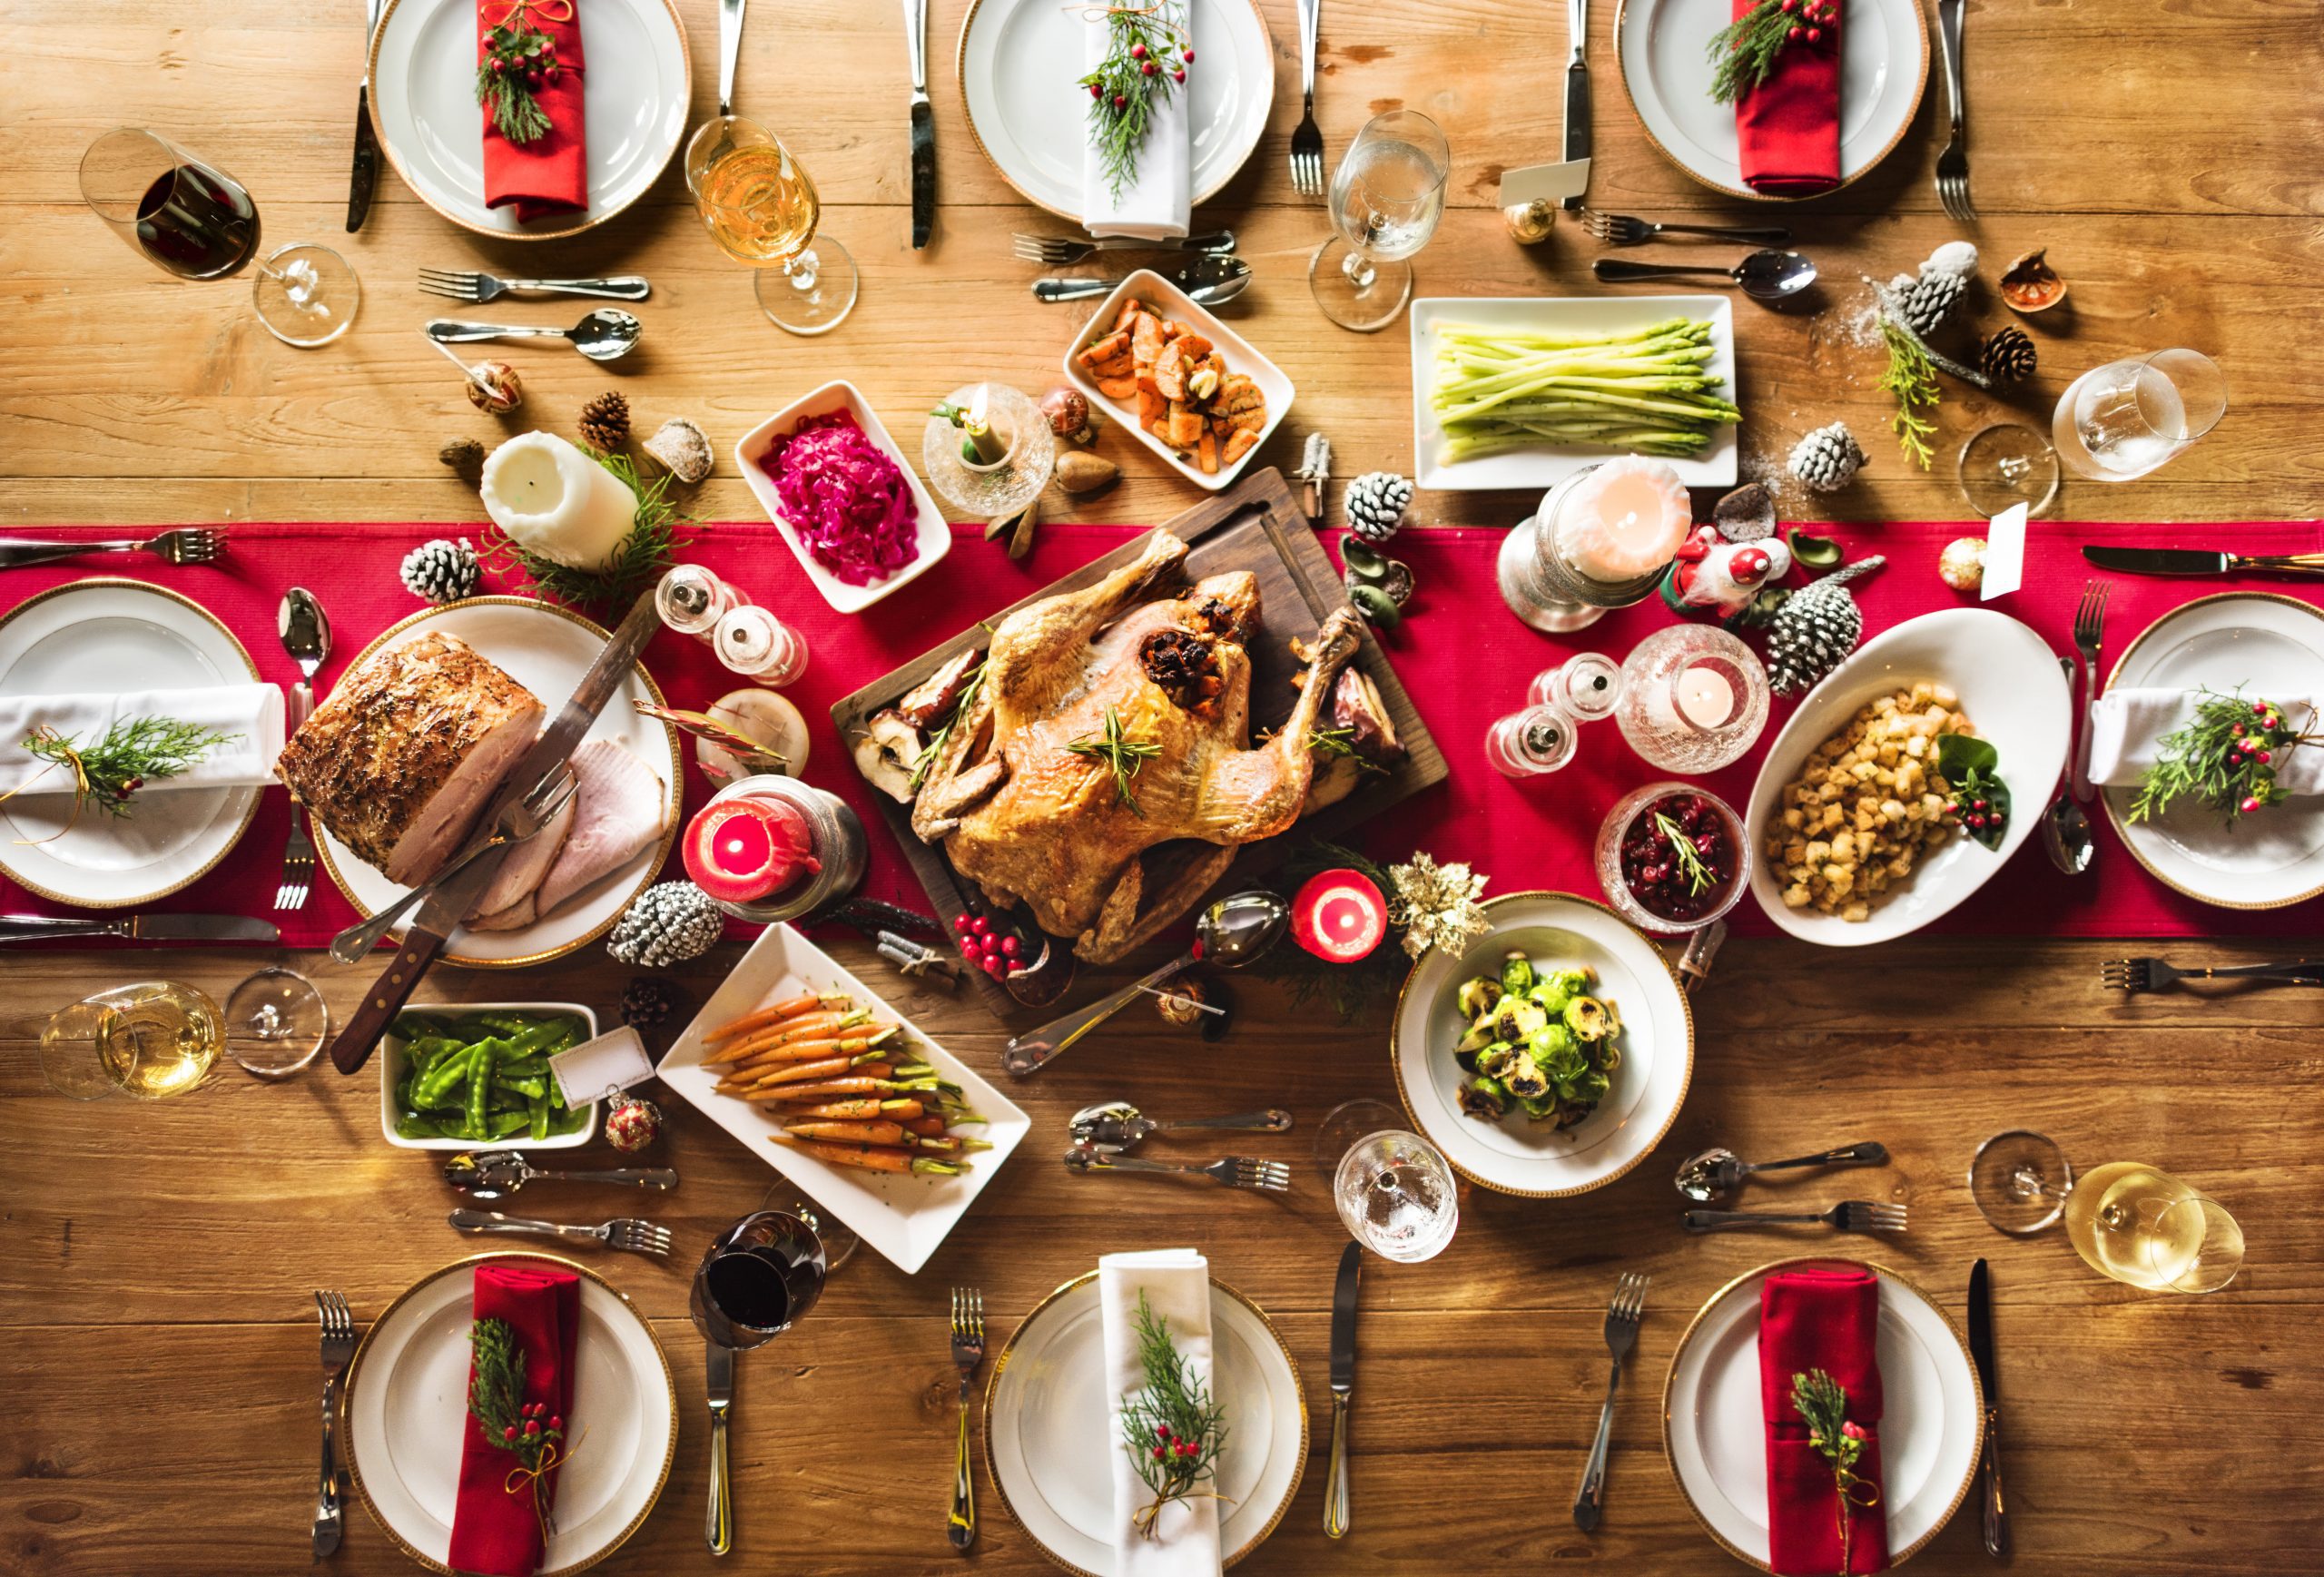 Strategies to Stay Slim and Sharp for the Holidays by Dr. Maita